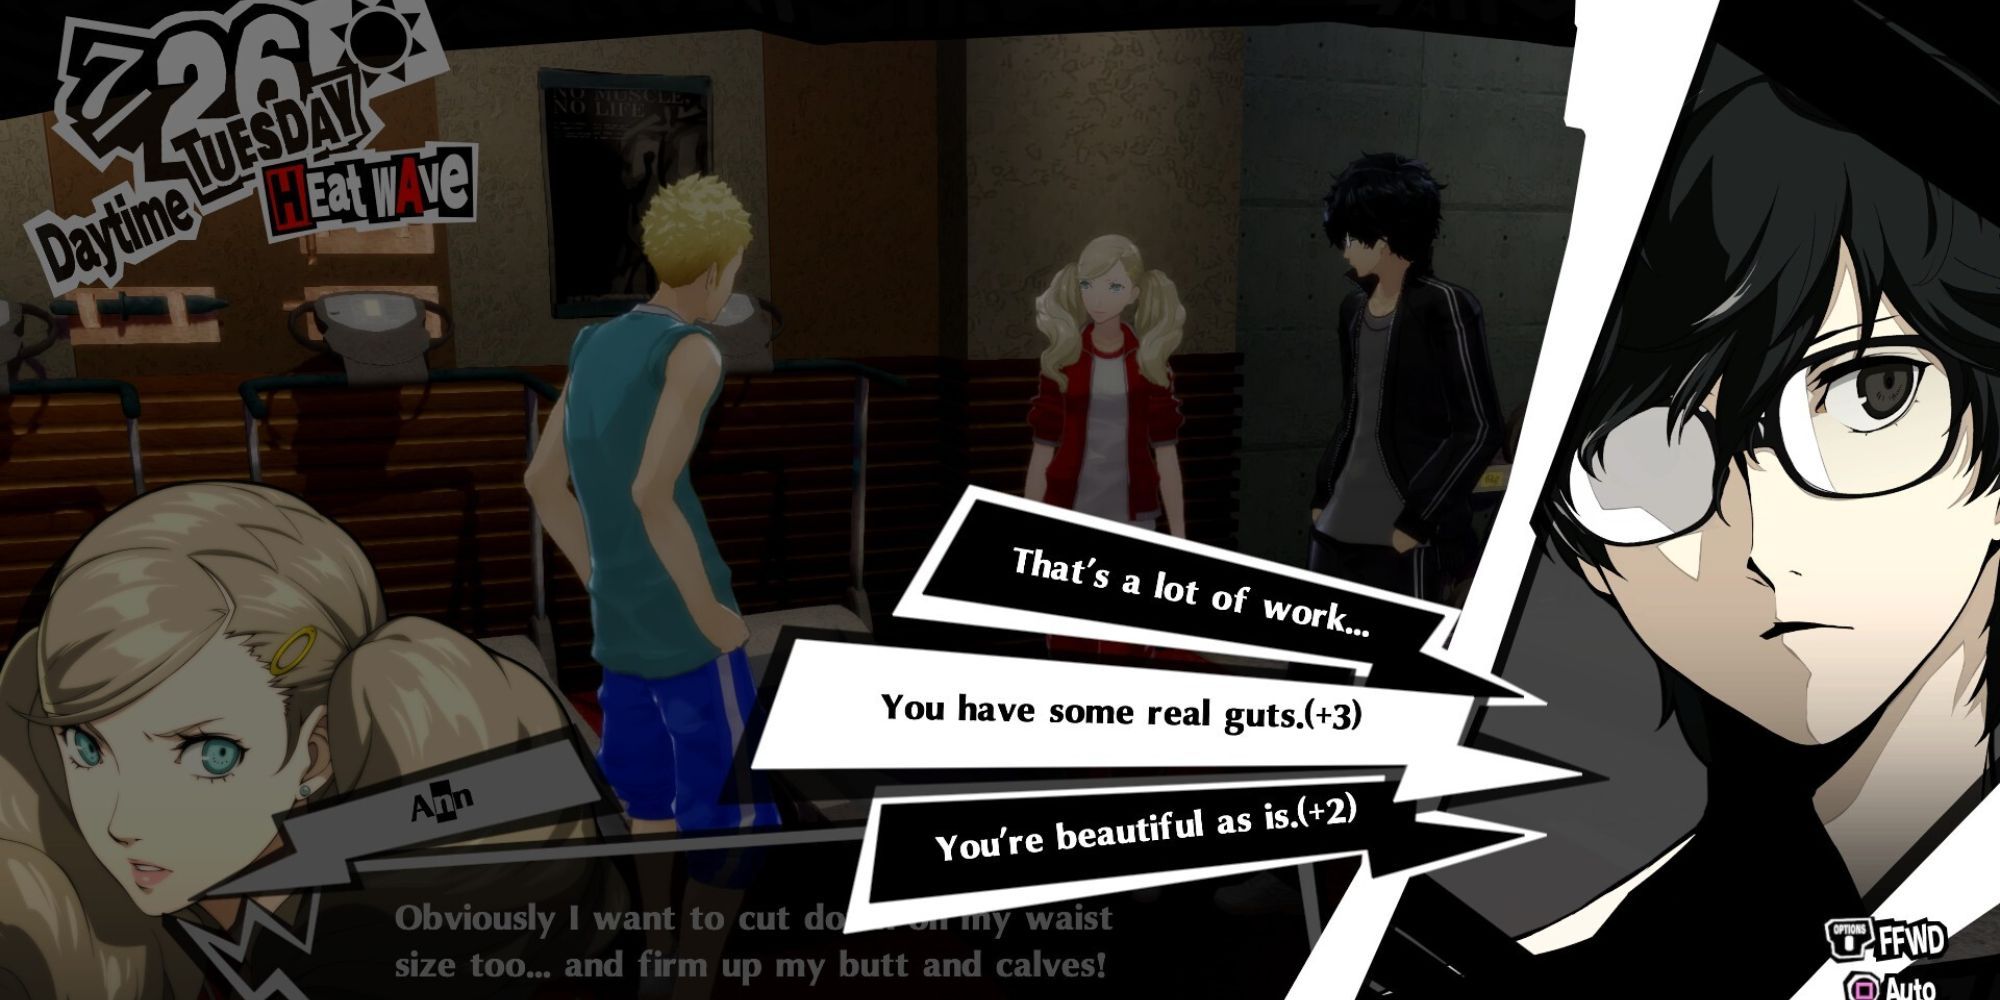 Persona 5 Royal - Modded screenshot shows the answers to Confidant hangouts with Ann and Ryuji